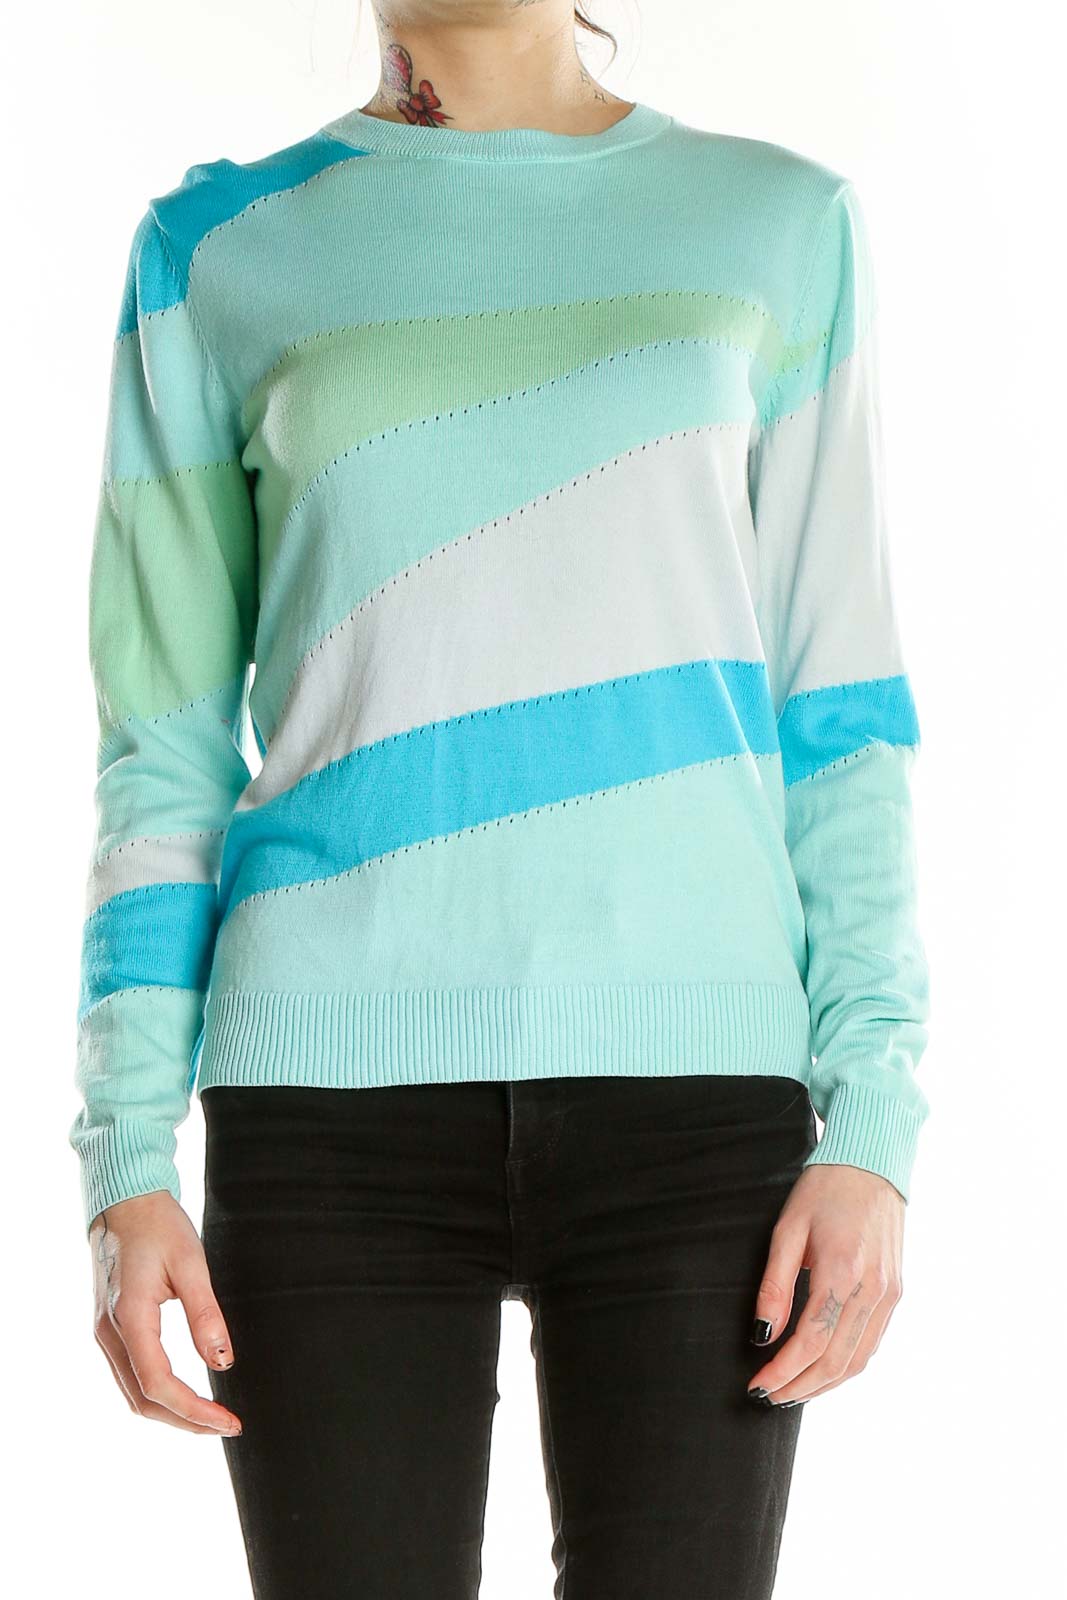 Blue Colorblock Sweater Front